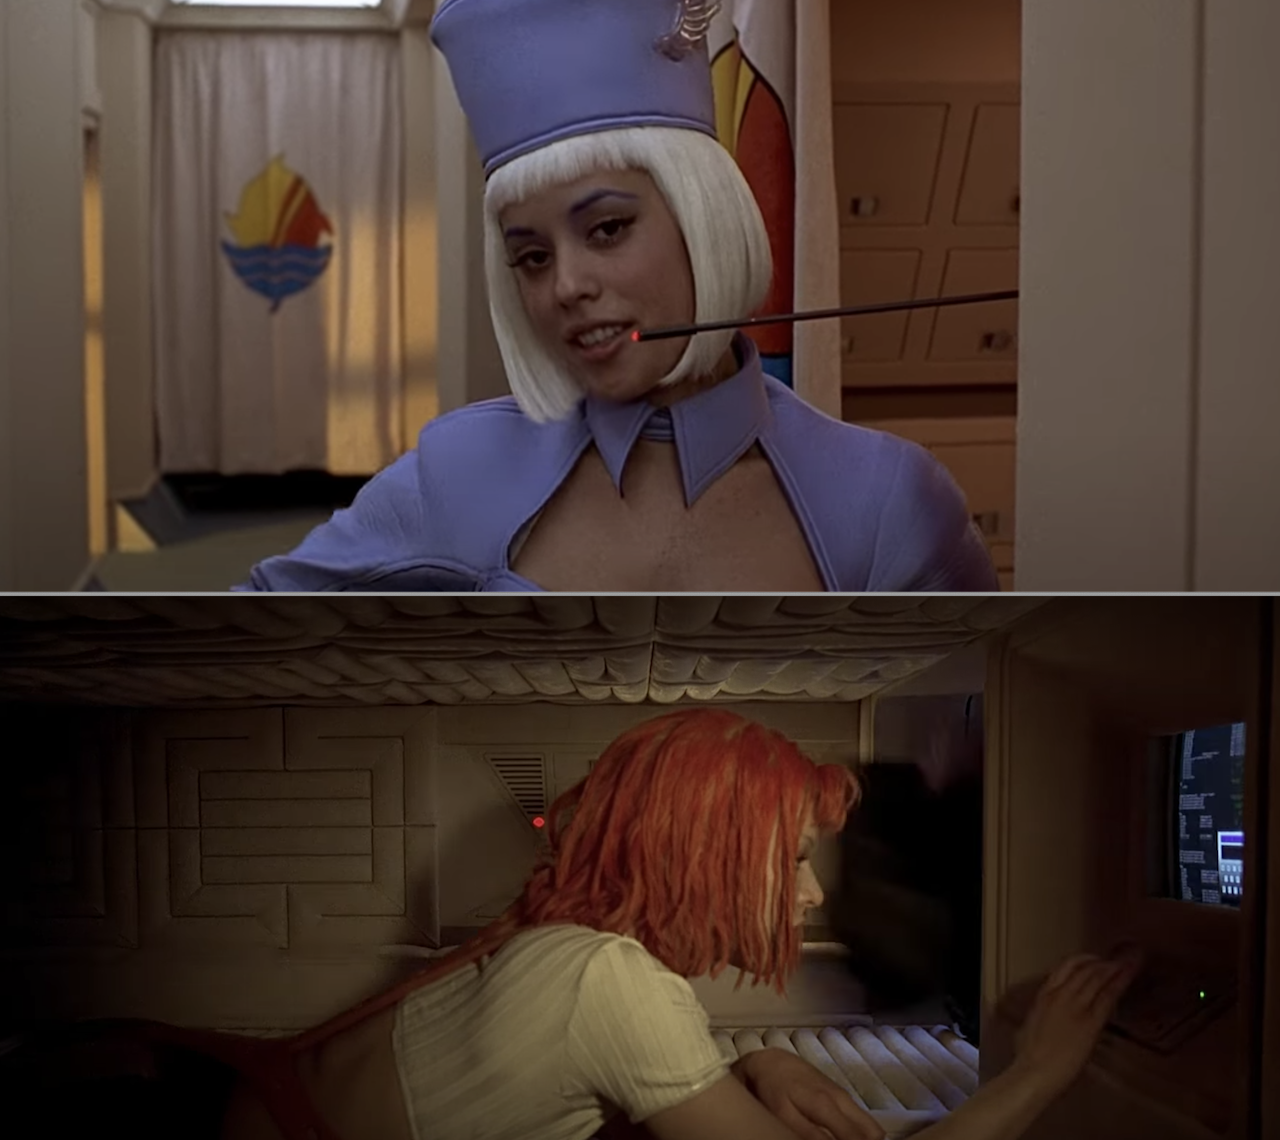 Flight attendants opening up the sleeping pods in &quot;The Fifth Element&quot;